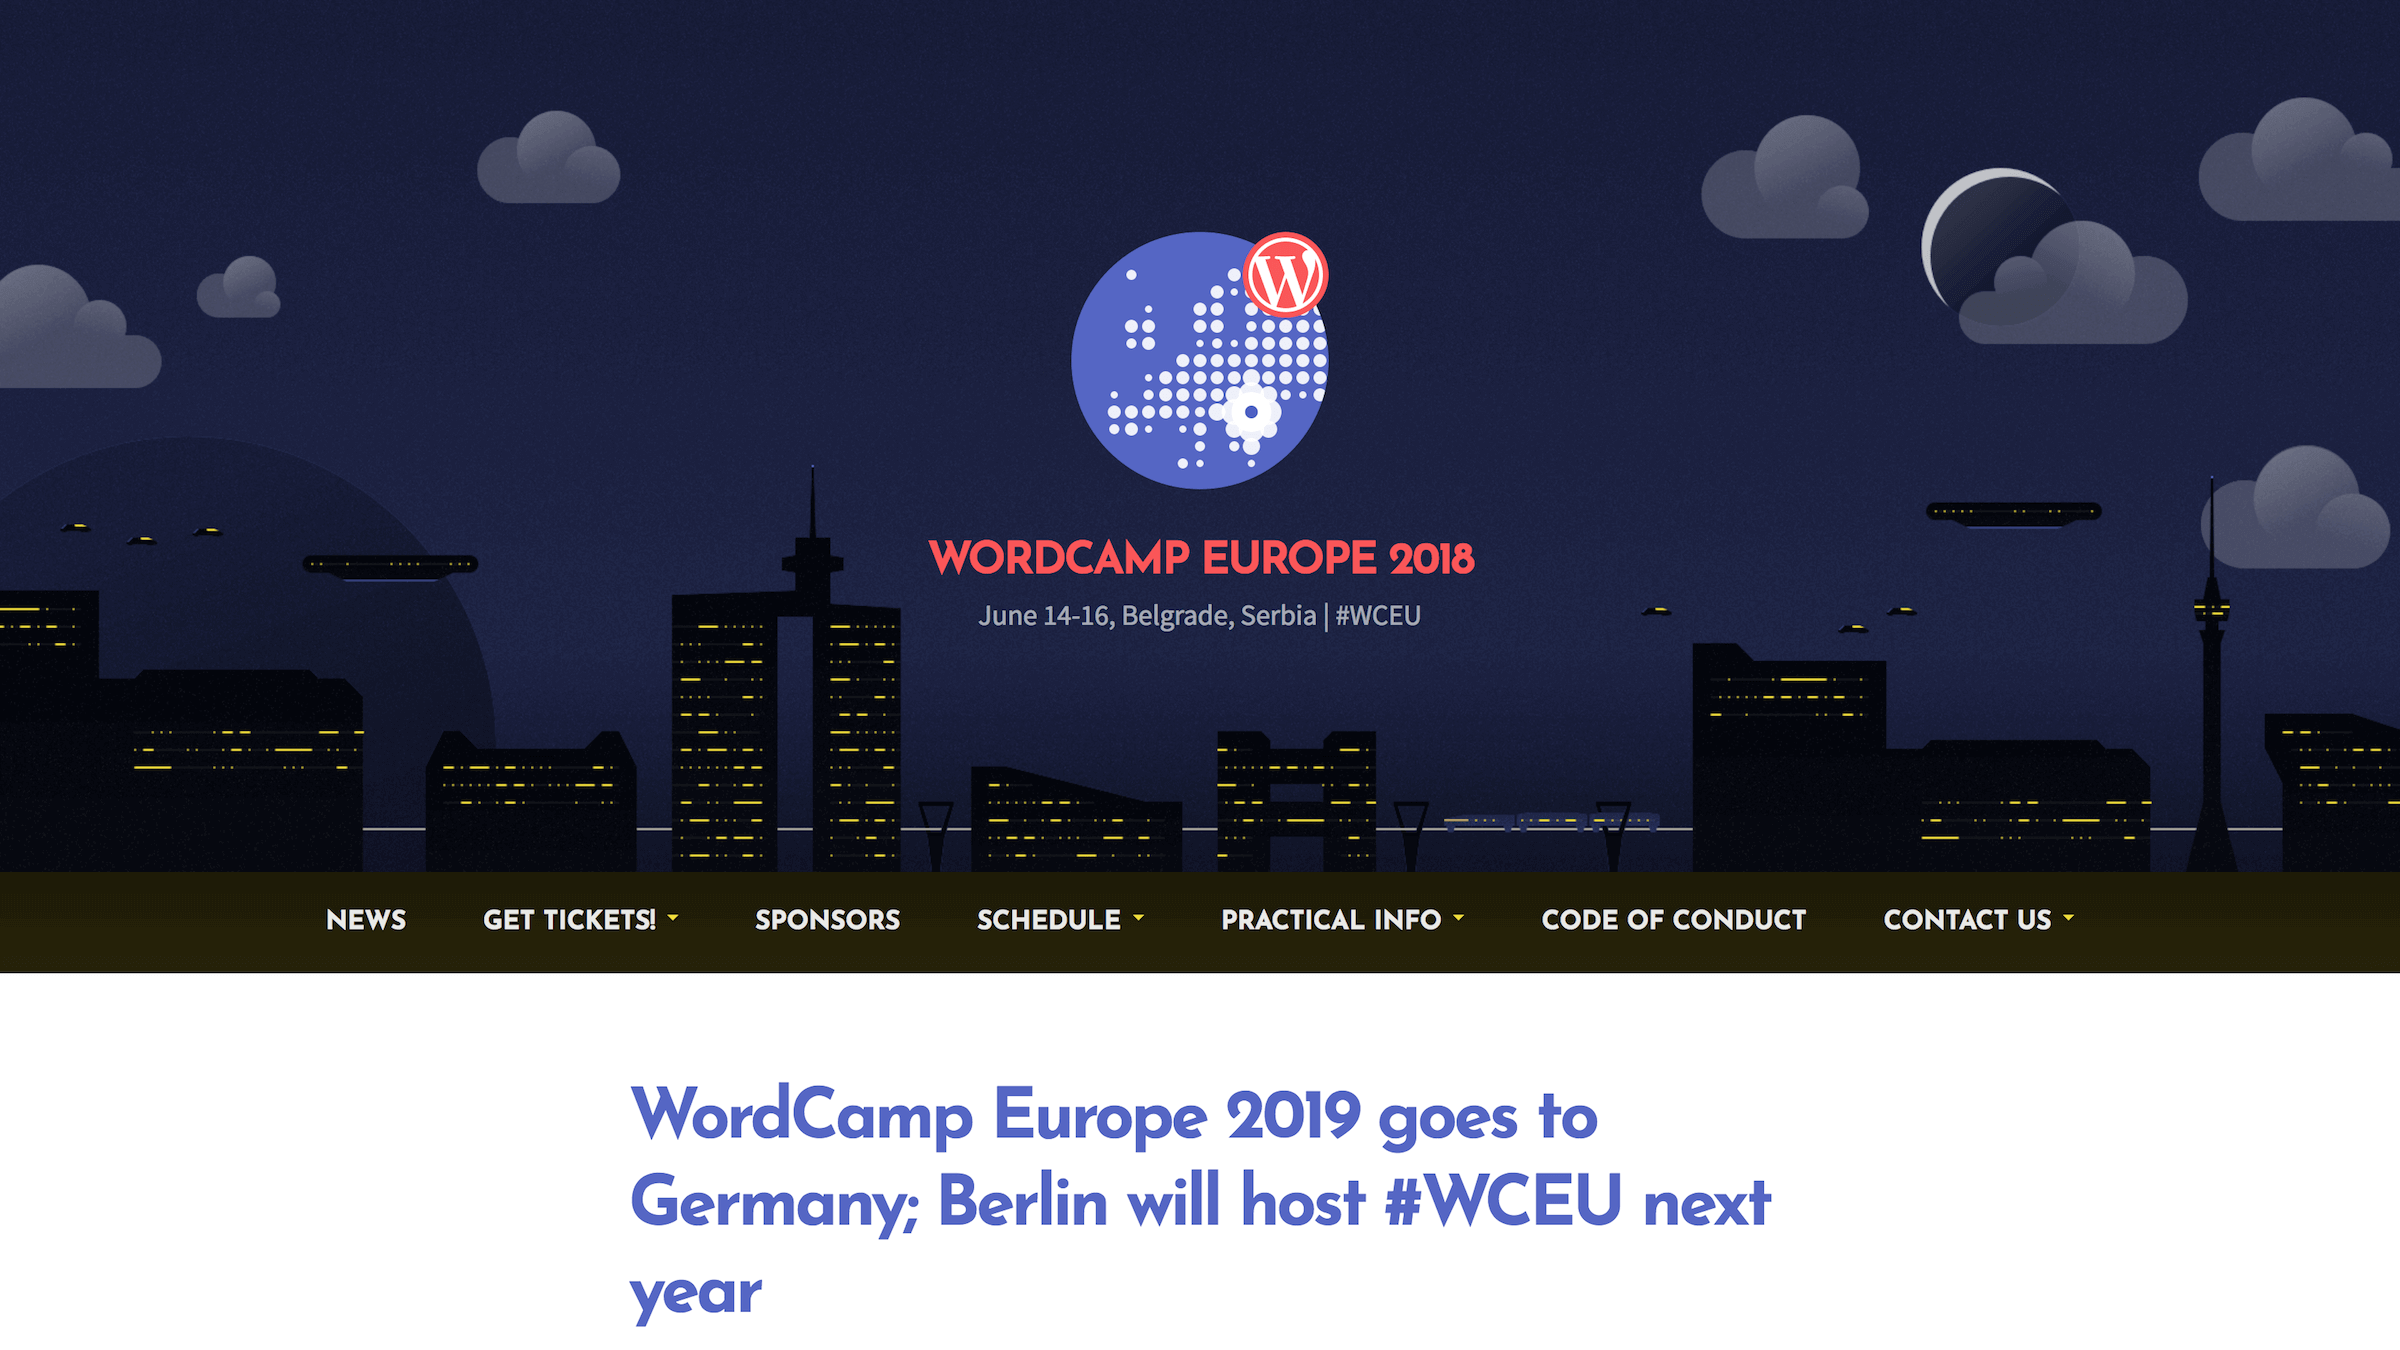 The WordCamp Europe home page.